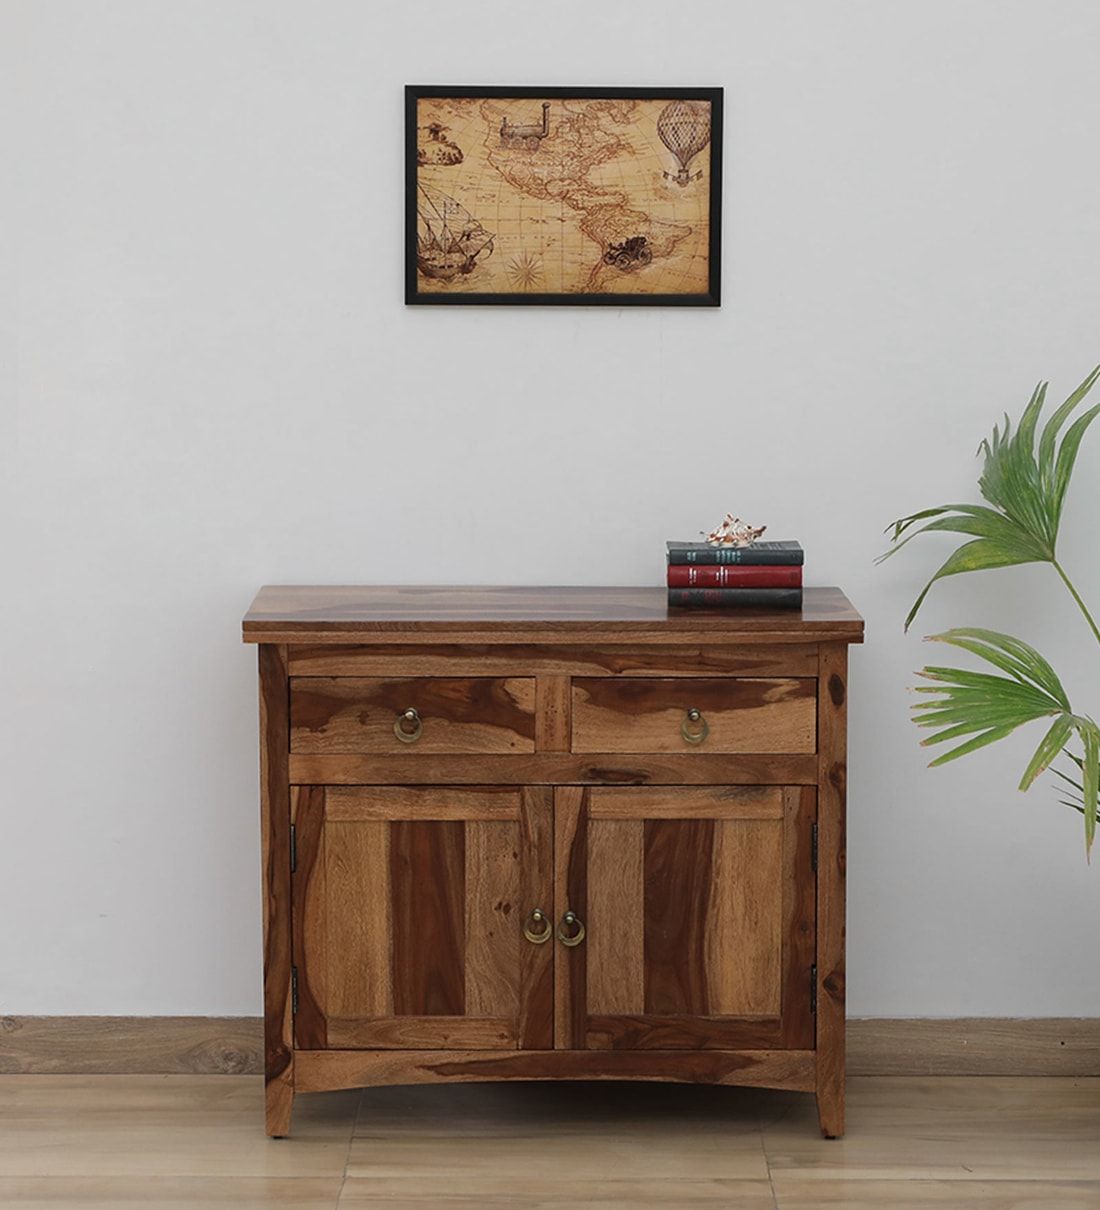 Buy Biscay Sheesham Wood Sideboard In Scratch Resistant Rustic Teak Finish Woodsworth From Pepperfry | Pepperfry Intended For Recent Sideboards With Breathable Mesh Doors (Photo 7 of 15)